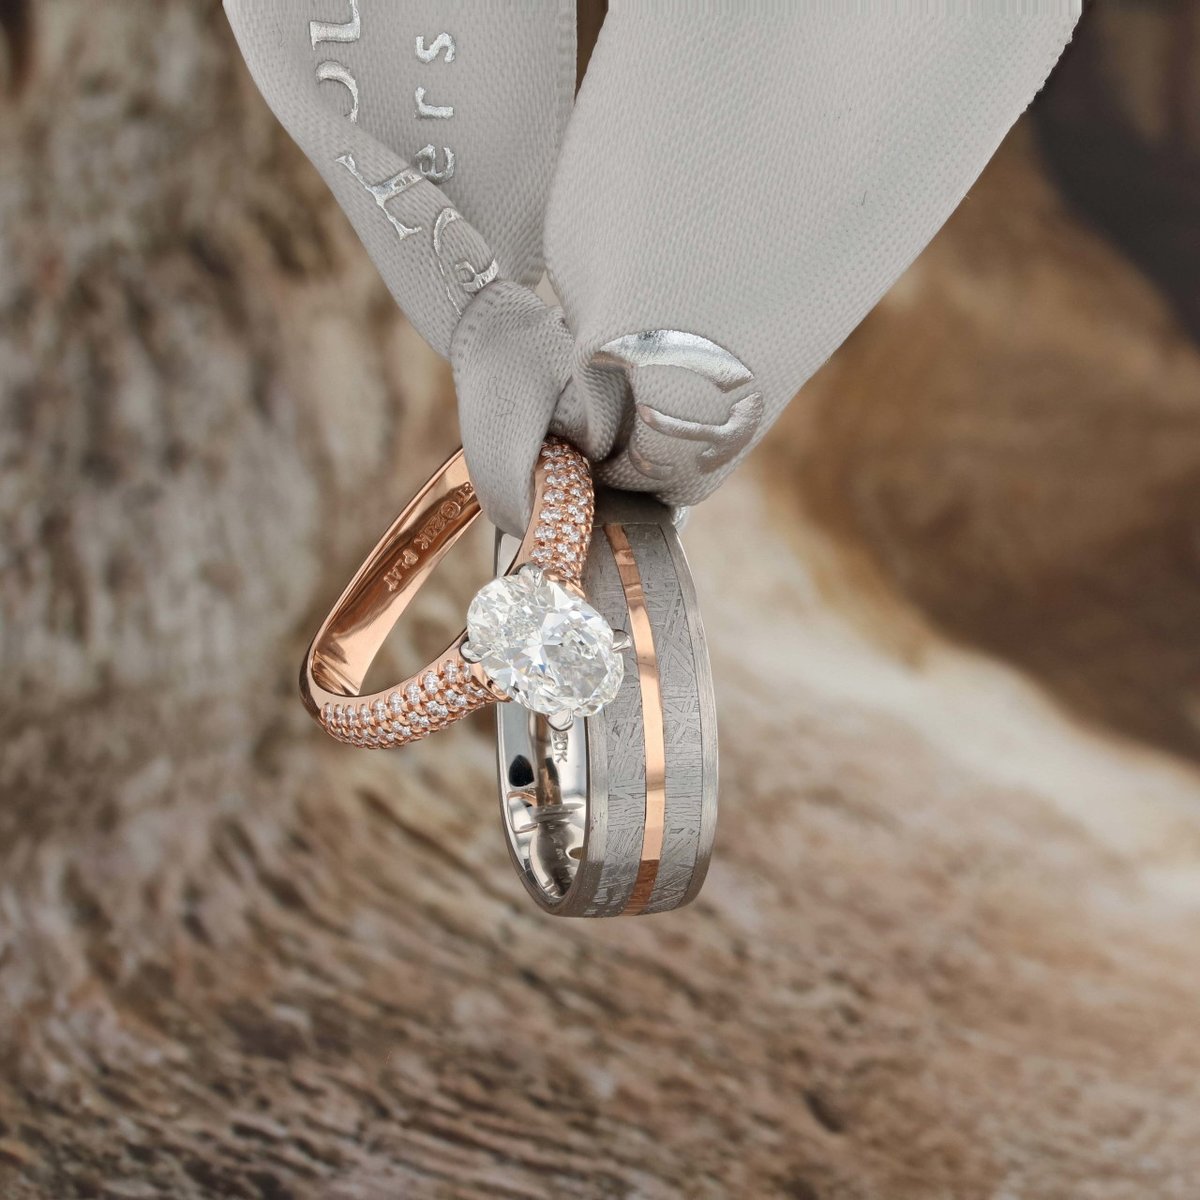 How about this wedding set? Oval diamond set in platinum and rose gold with a men's meteorite band. #weddingrings #bridalset #coffinandtrout